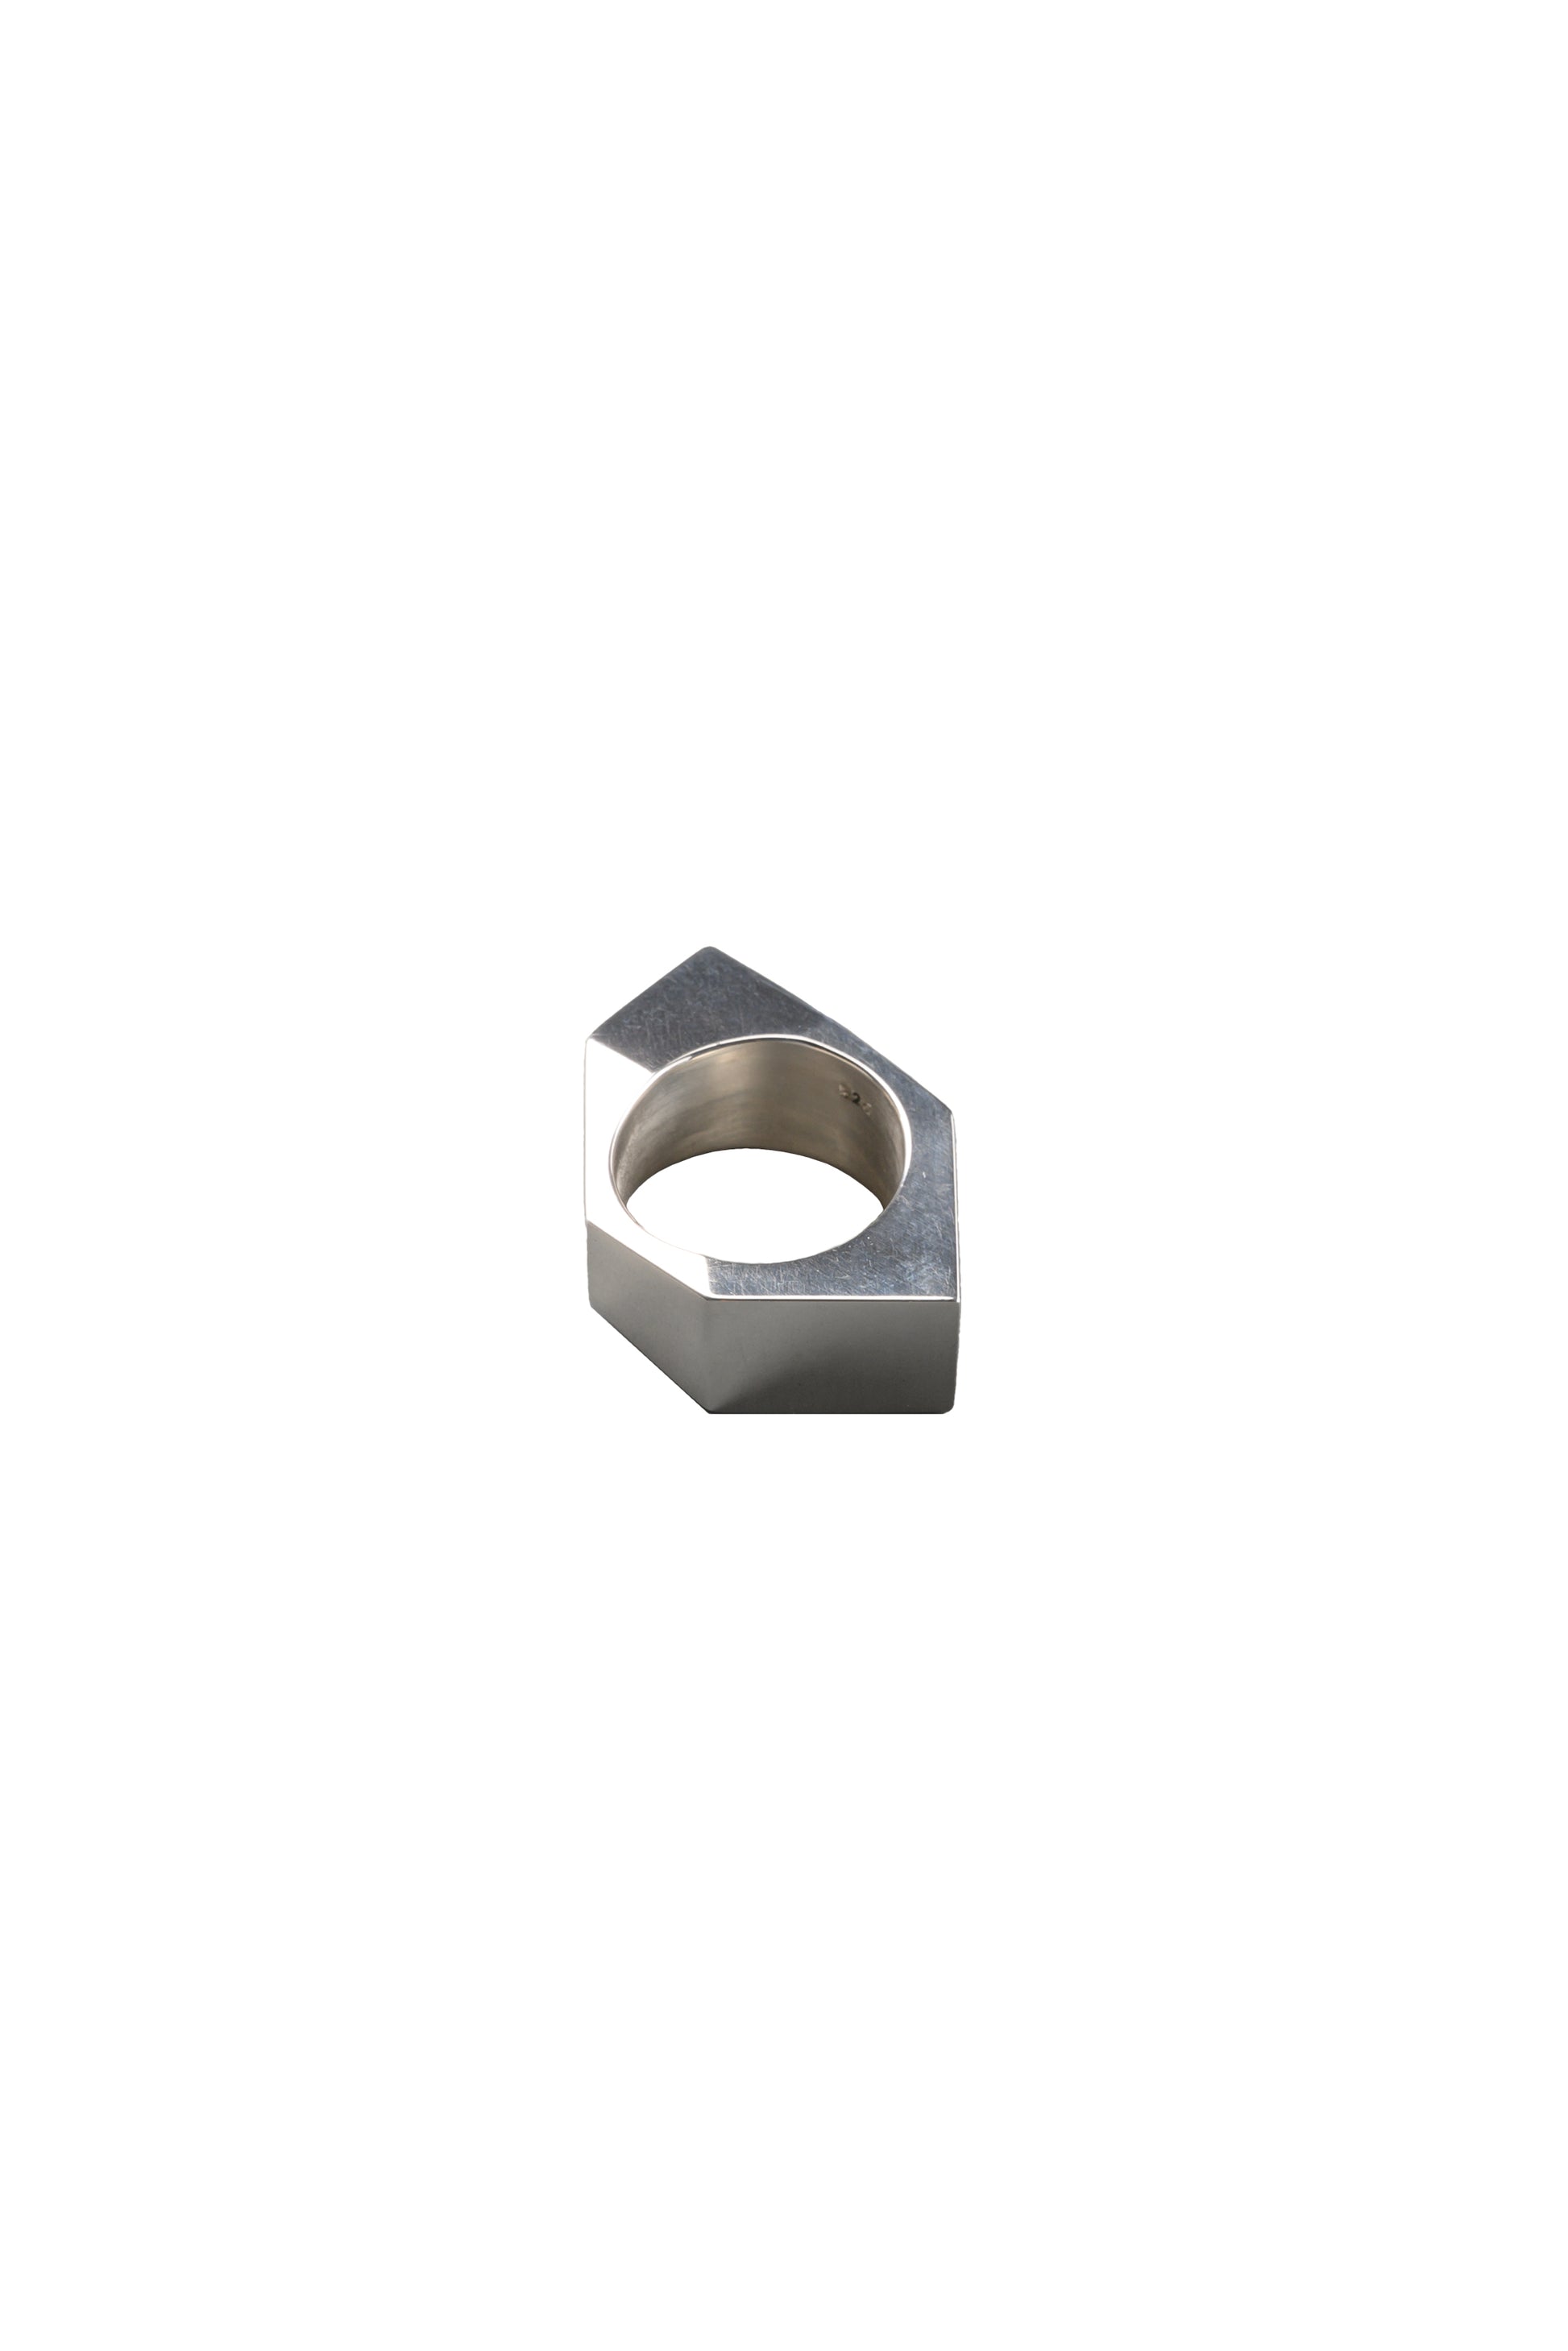 Contemporary silver ring with a unique isometric design, showcasing a minimalist and architectural aesthetic